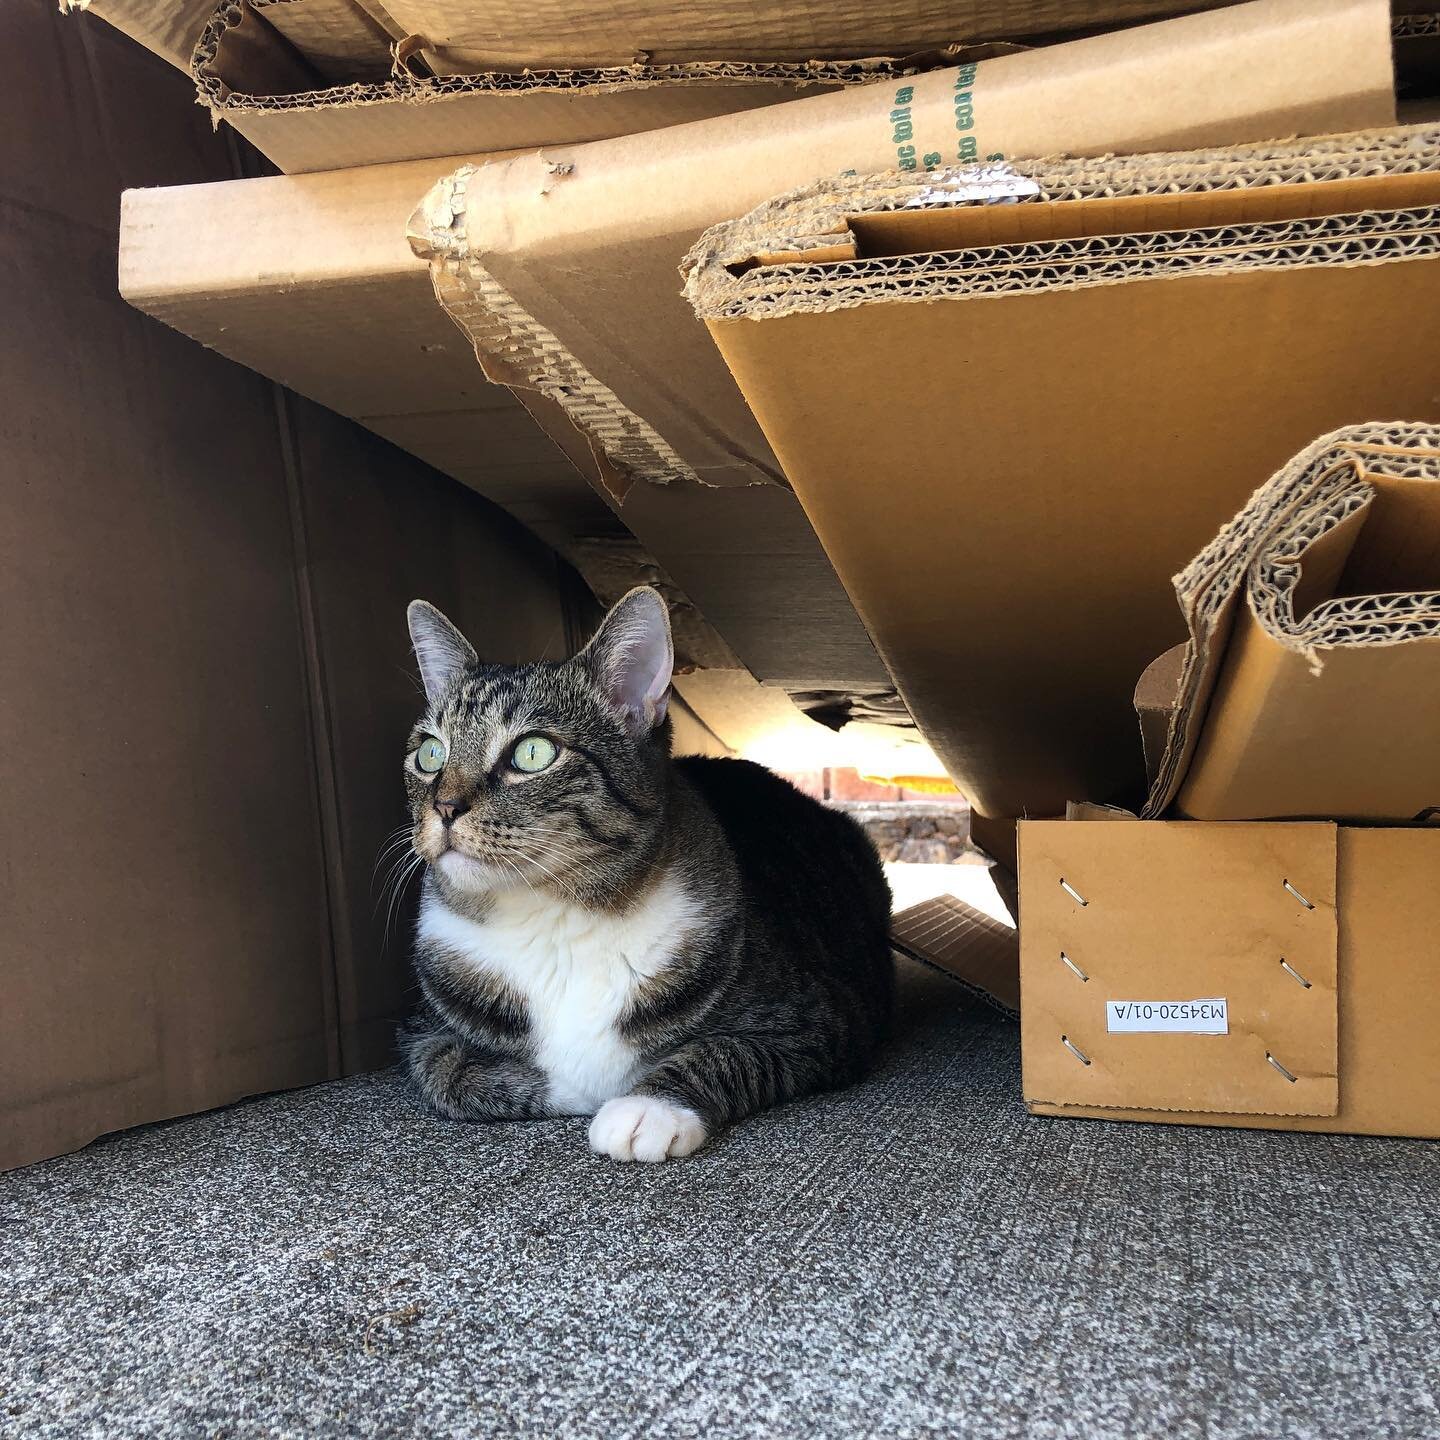 Happy #caturday ✨ throwback to our cat Milo making house in the box our embroidery machine came in. 🌱reduce, reuse, recycle🌿